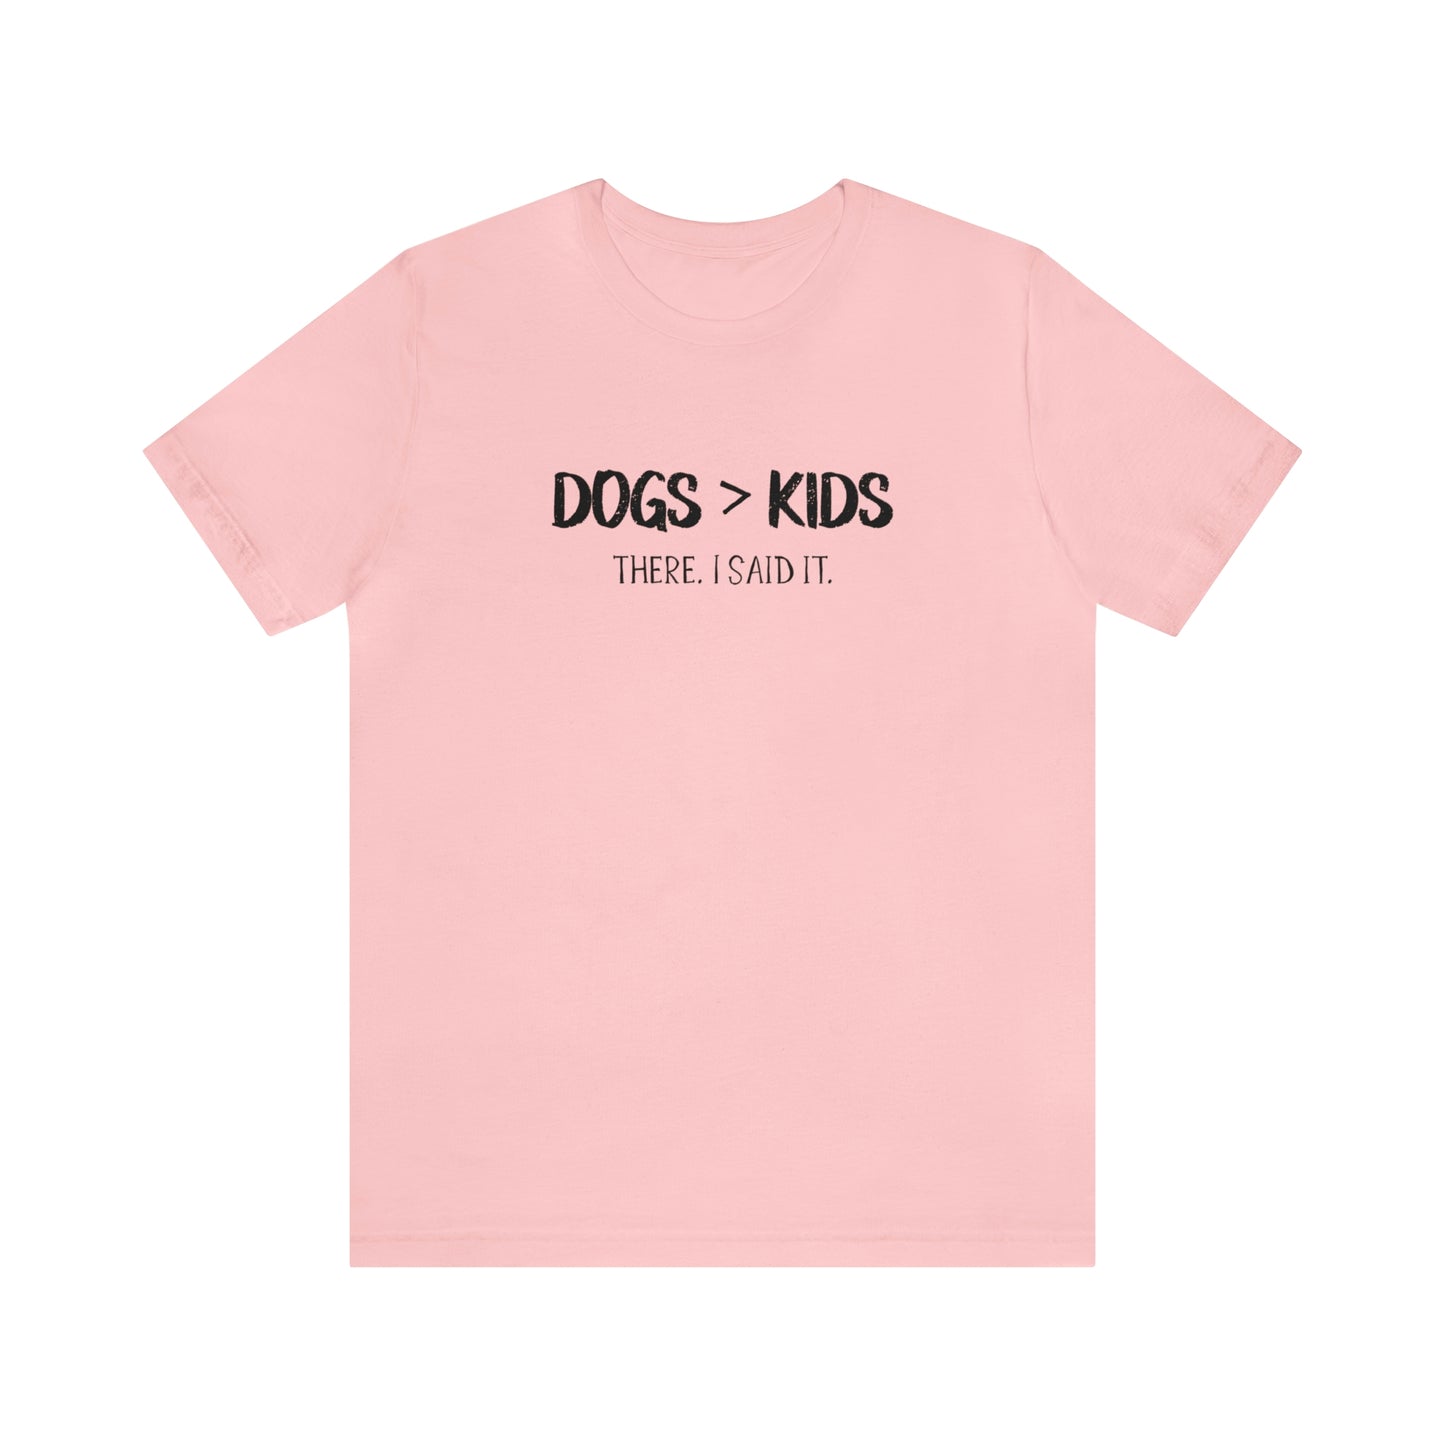 dogs are better than kids t shirt pink